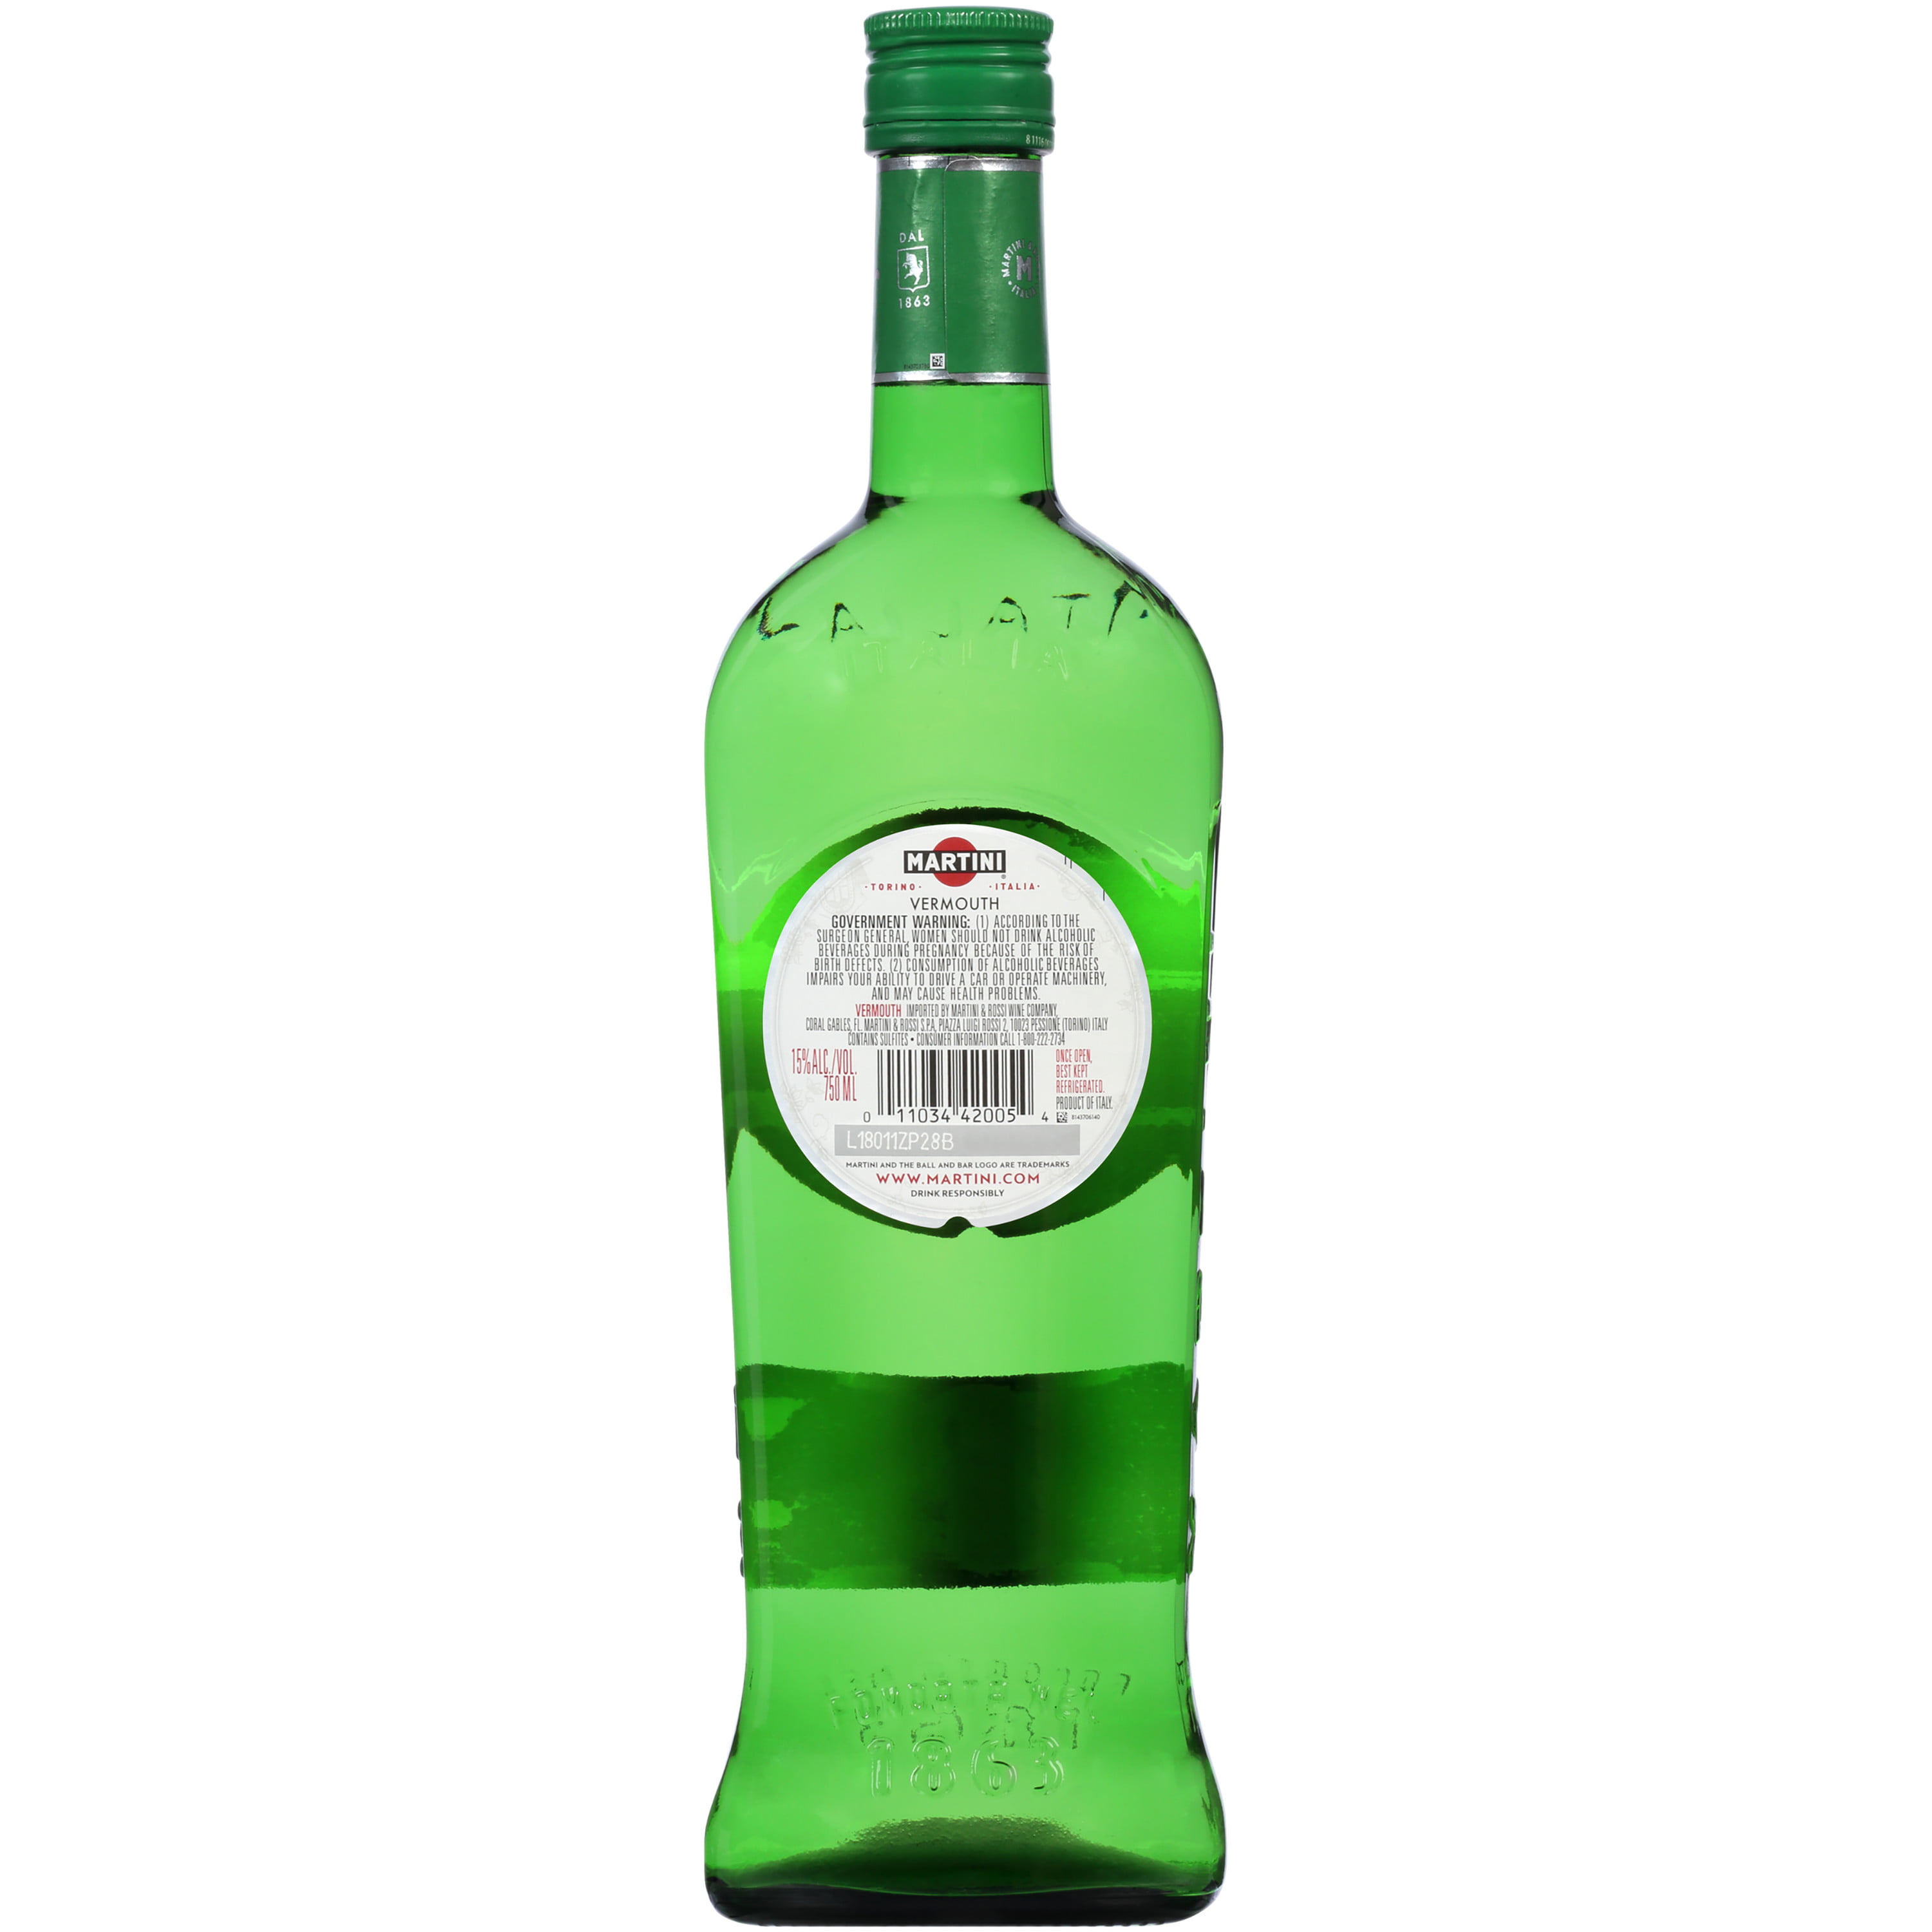 Extra 15% ABV Mixer, Bottle, Dry MARTINI Cocktail & Vermouth ROSSI 750 mL